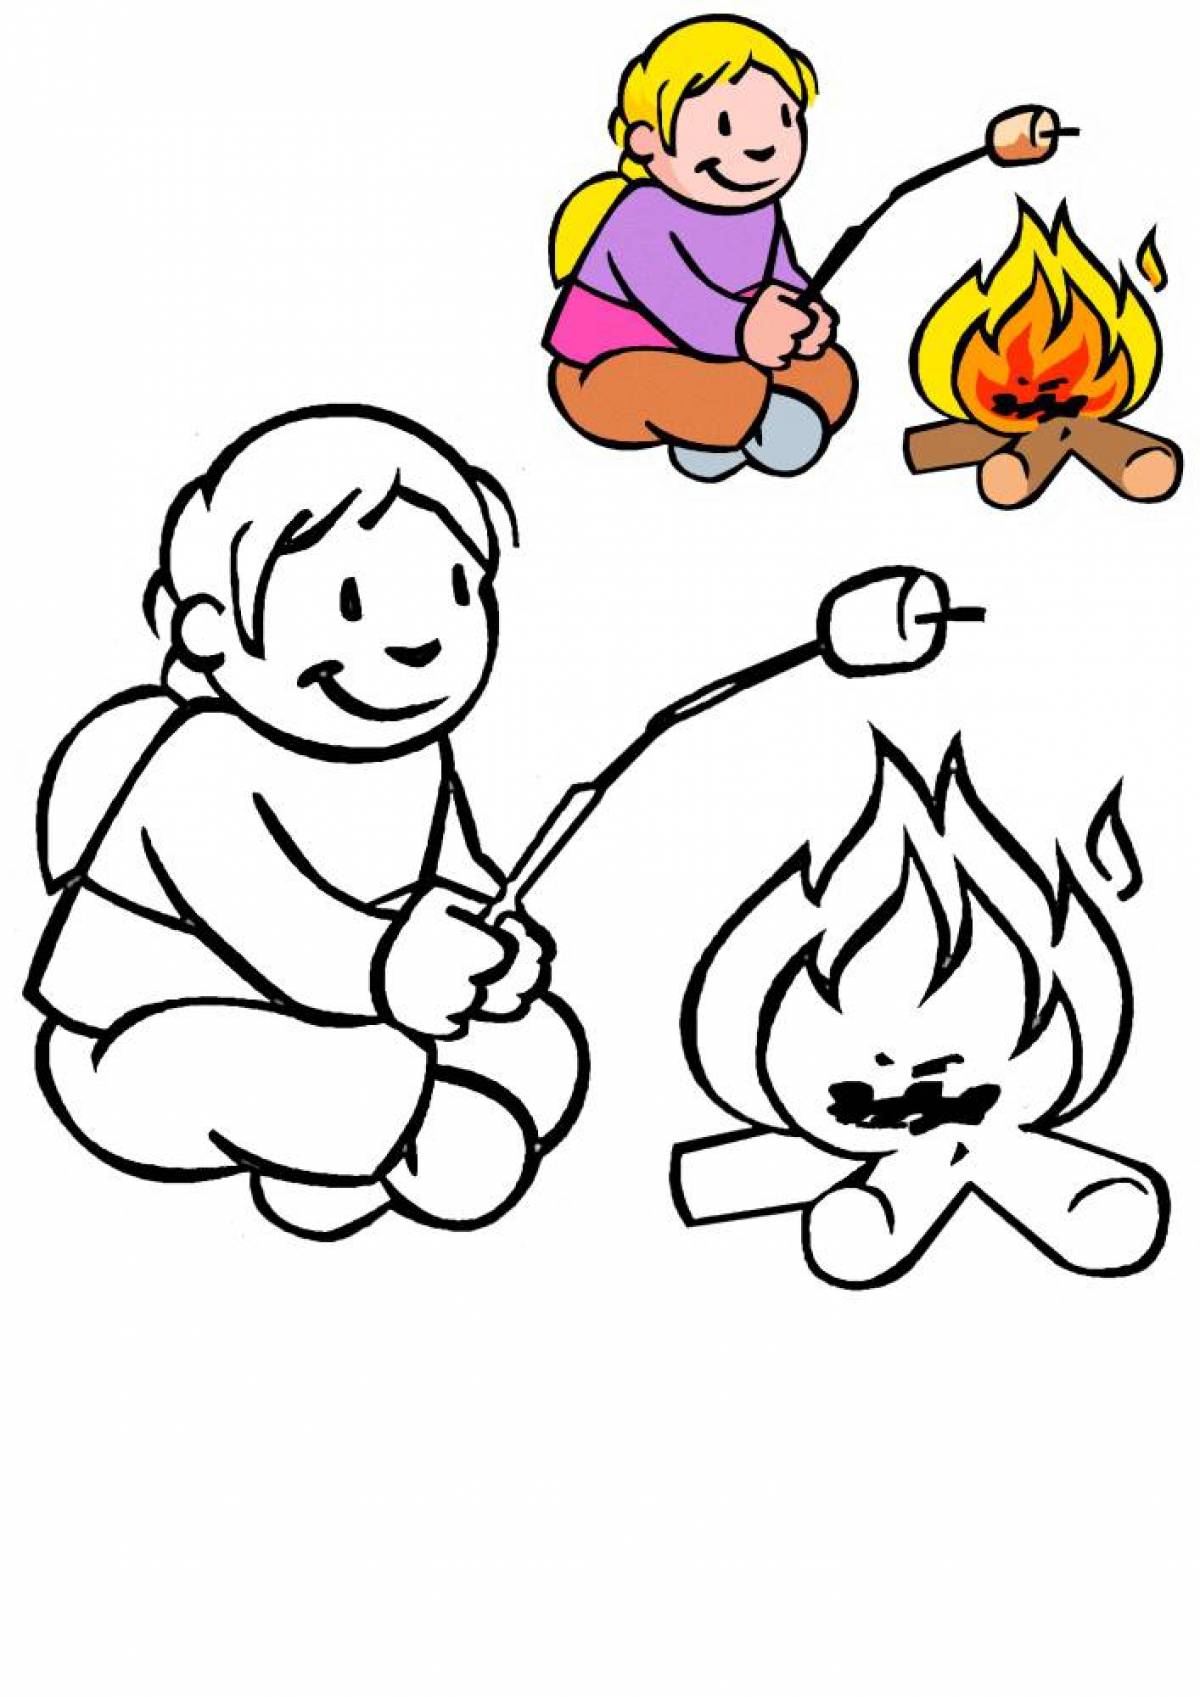 Charming fire coloring book for kids